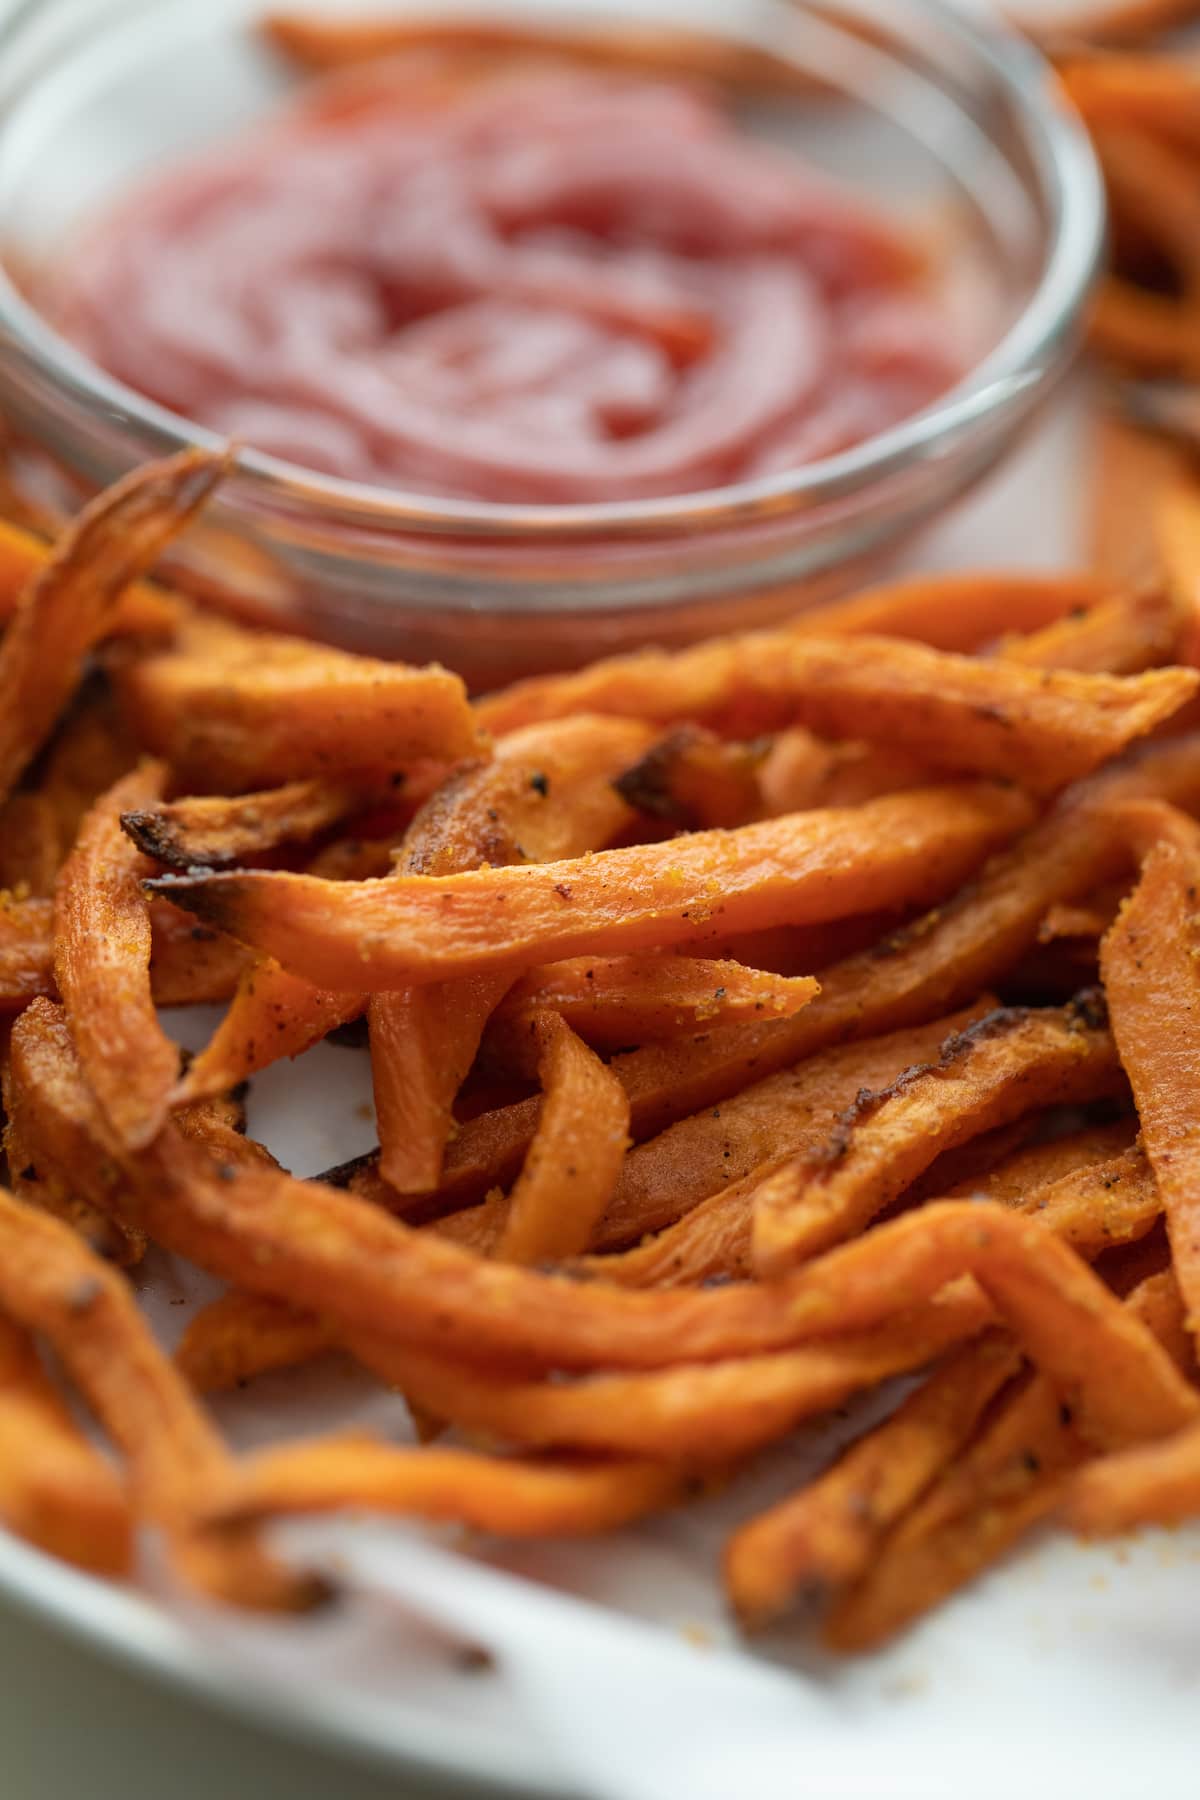 sweet potato fries on plate with ketchup